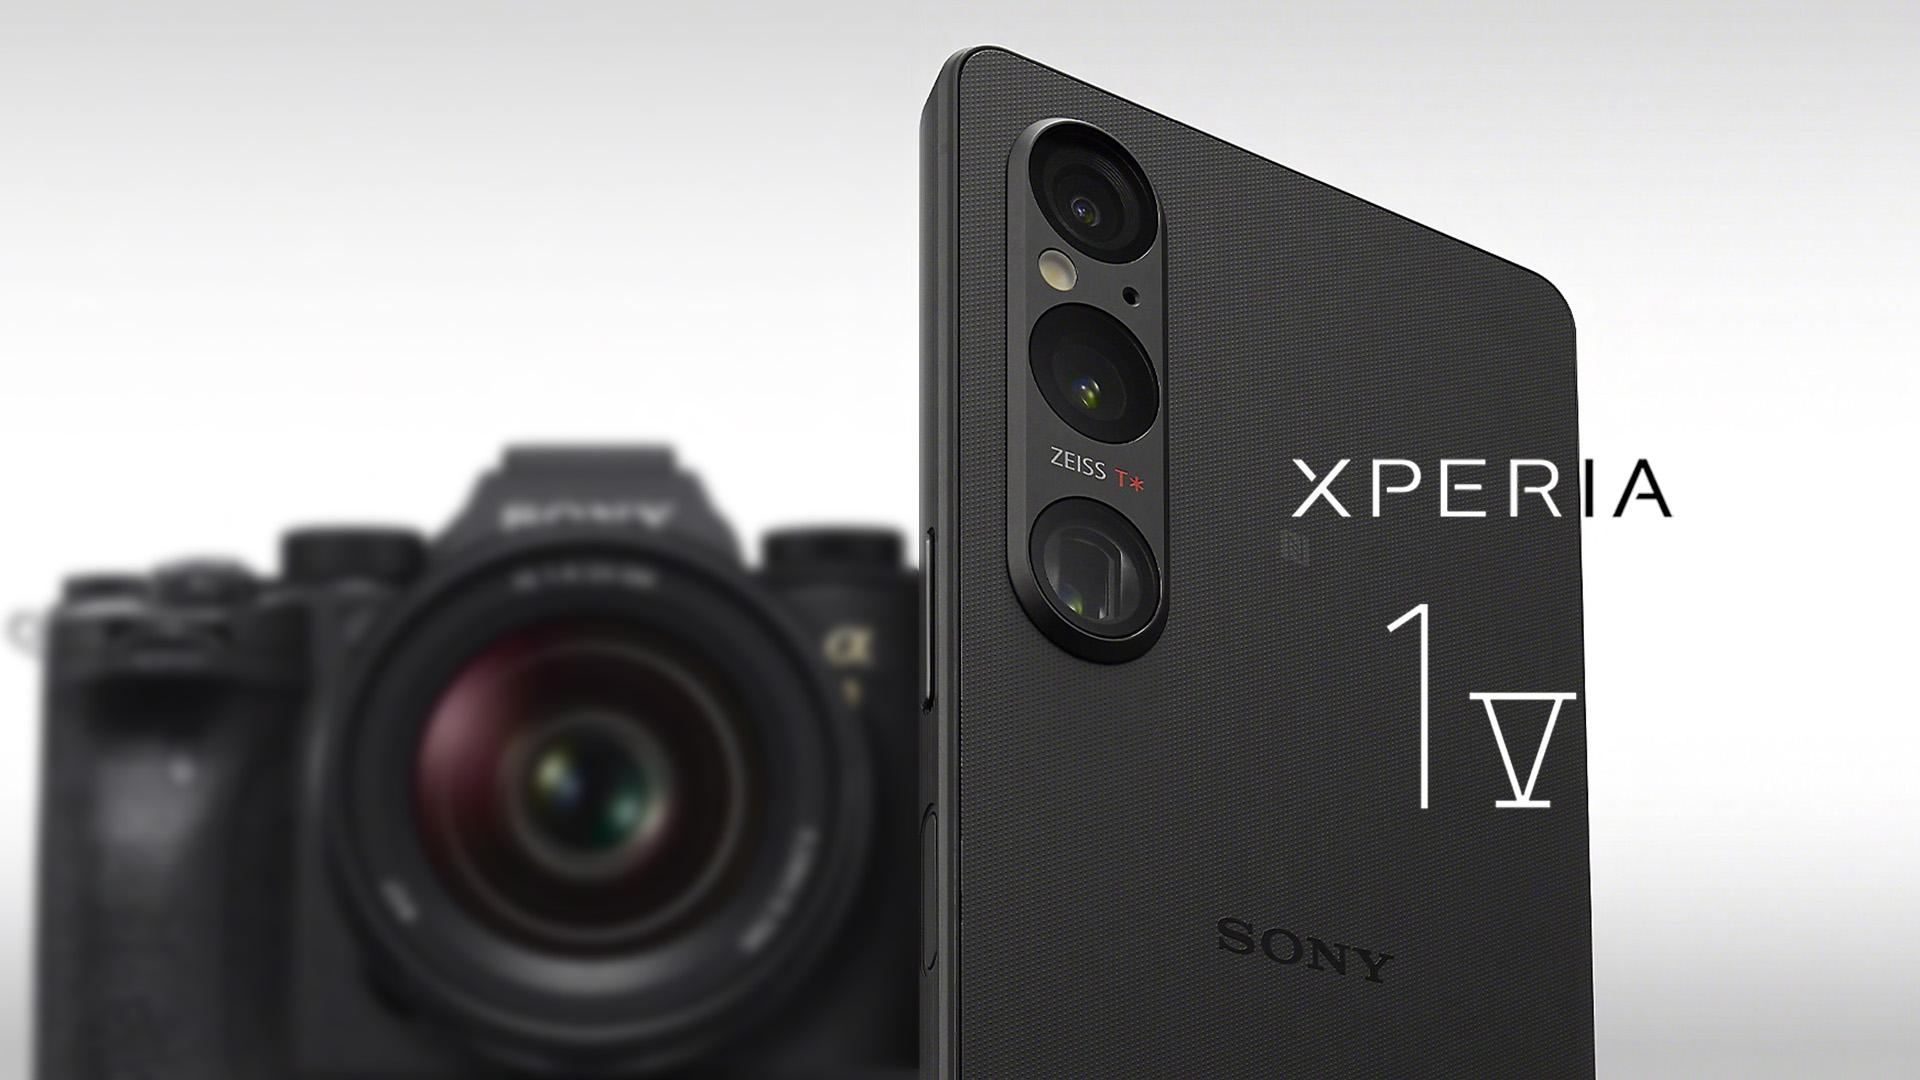 Sony Leyanxxx Hdvideo - Sony Xperia 1 V Flagship and Xperia 10 V Entry-Level Phones Introduced |  CineD